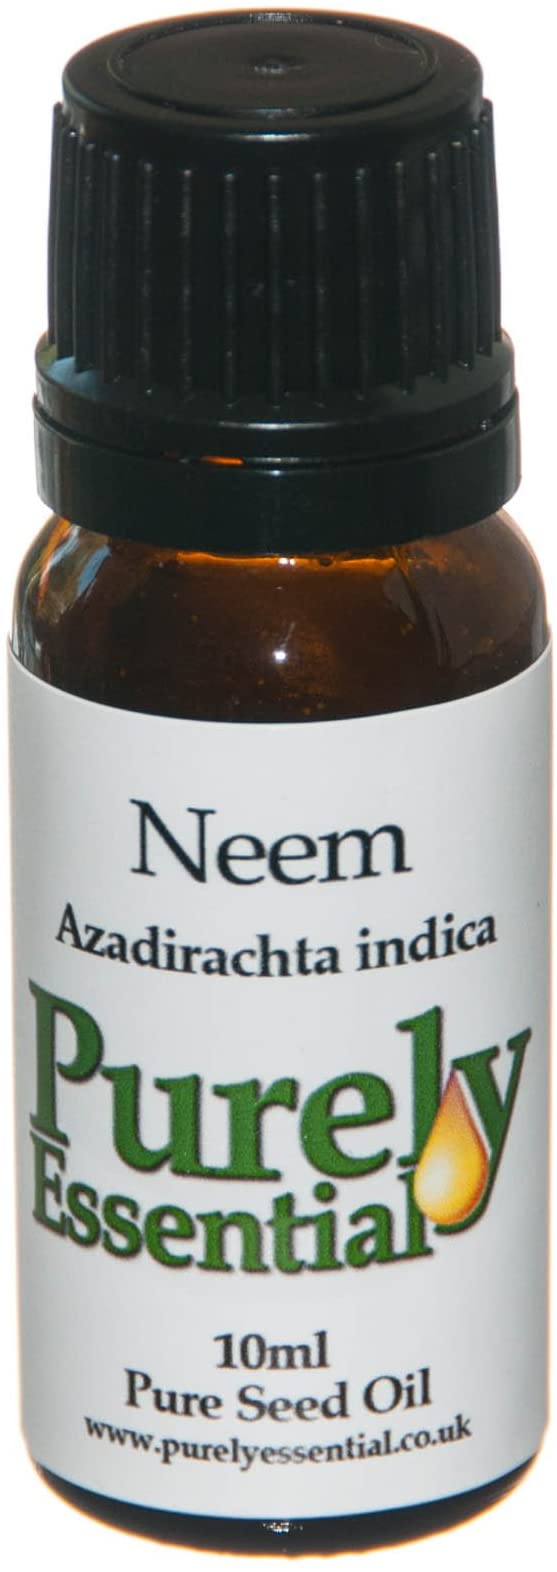 Neem Seed Carrier Oil 10ml Pure and Natural, Purely Essential